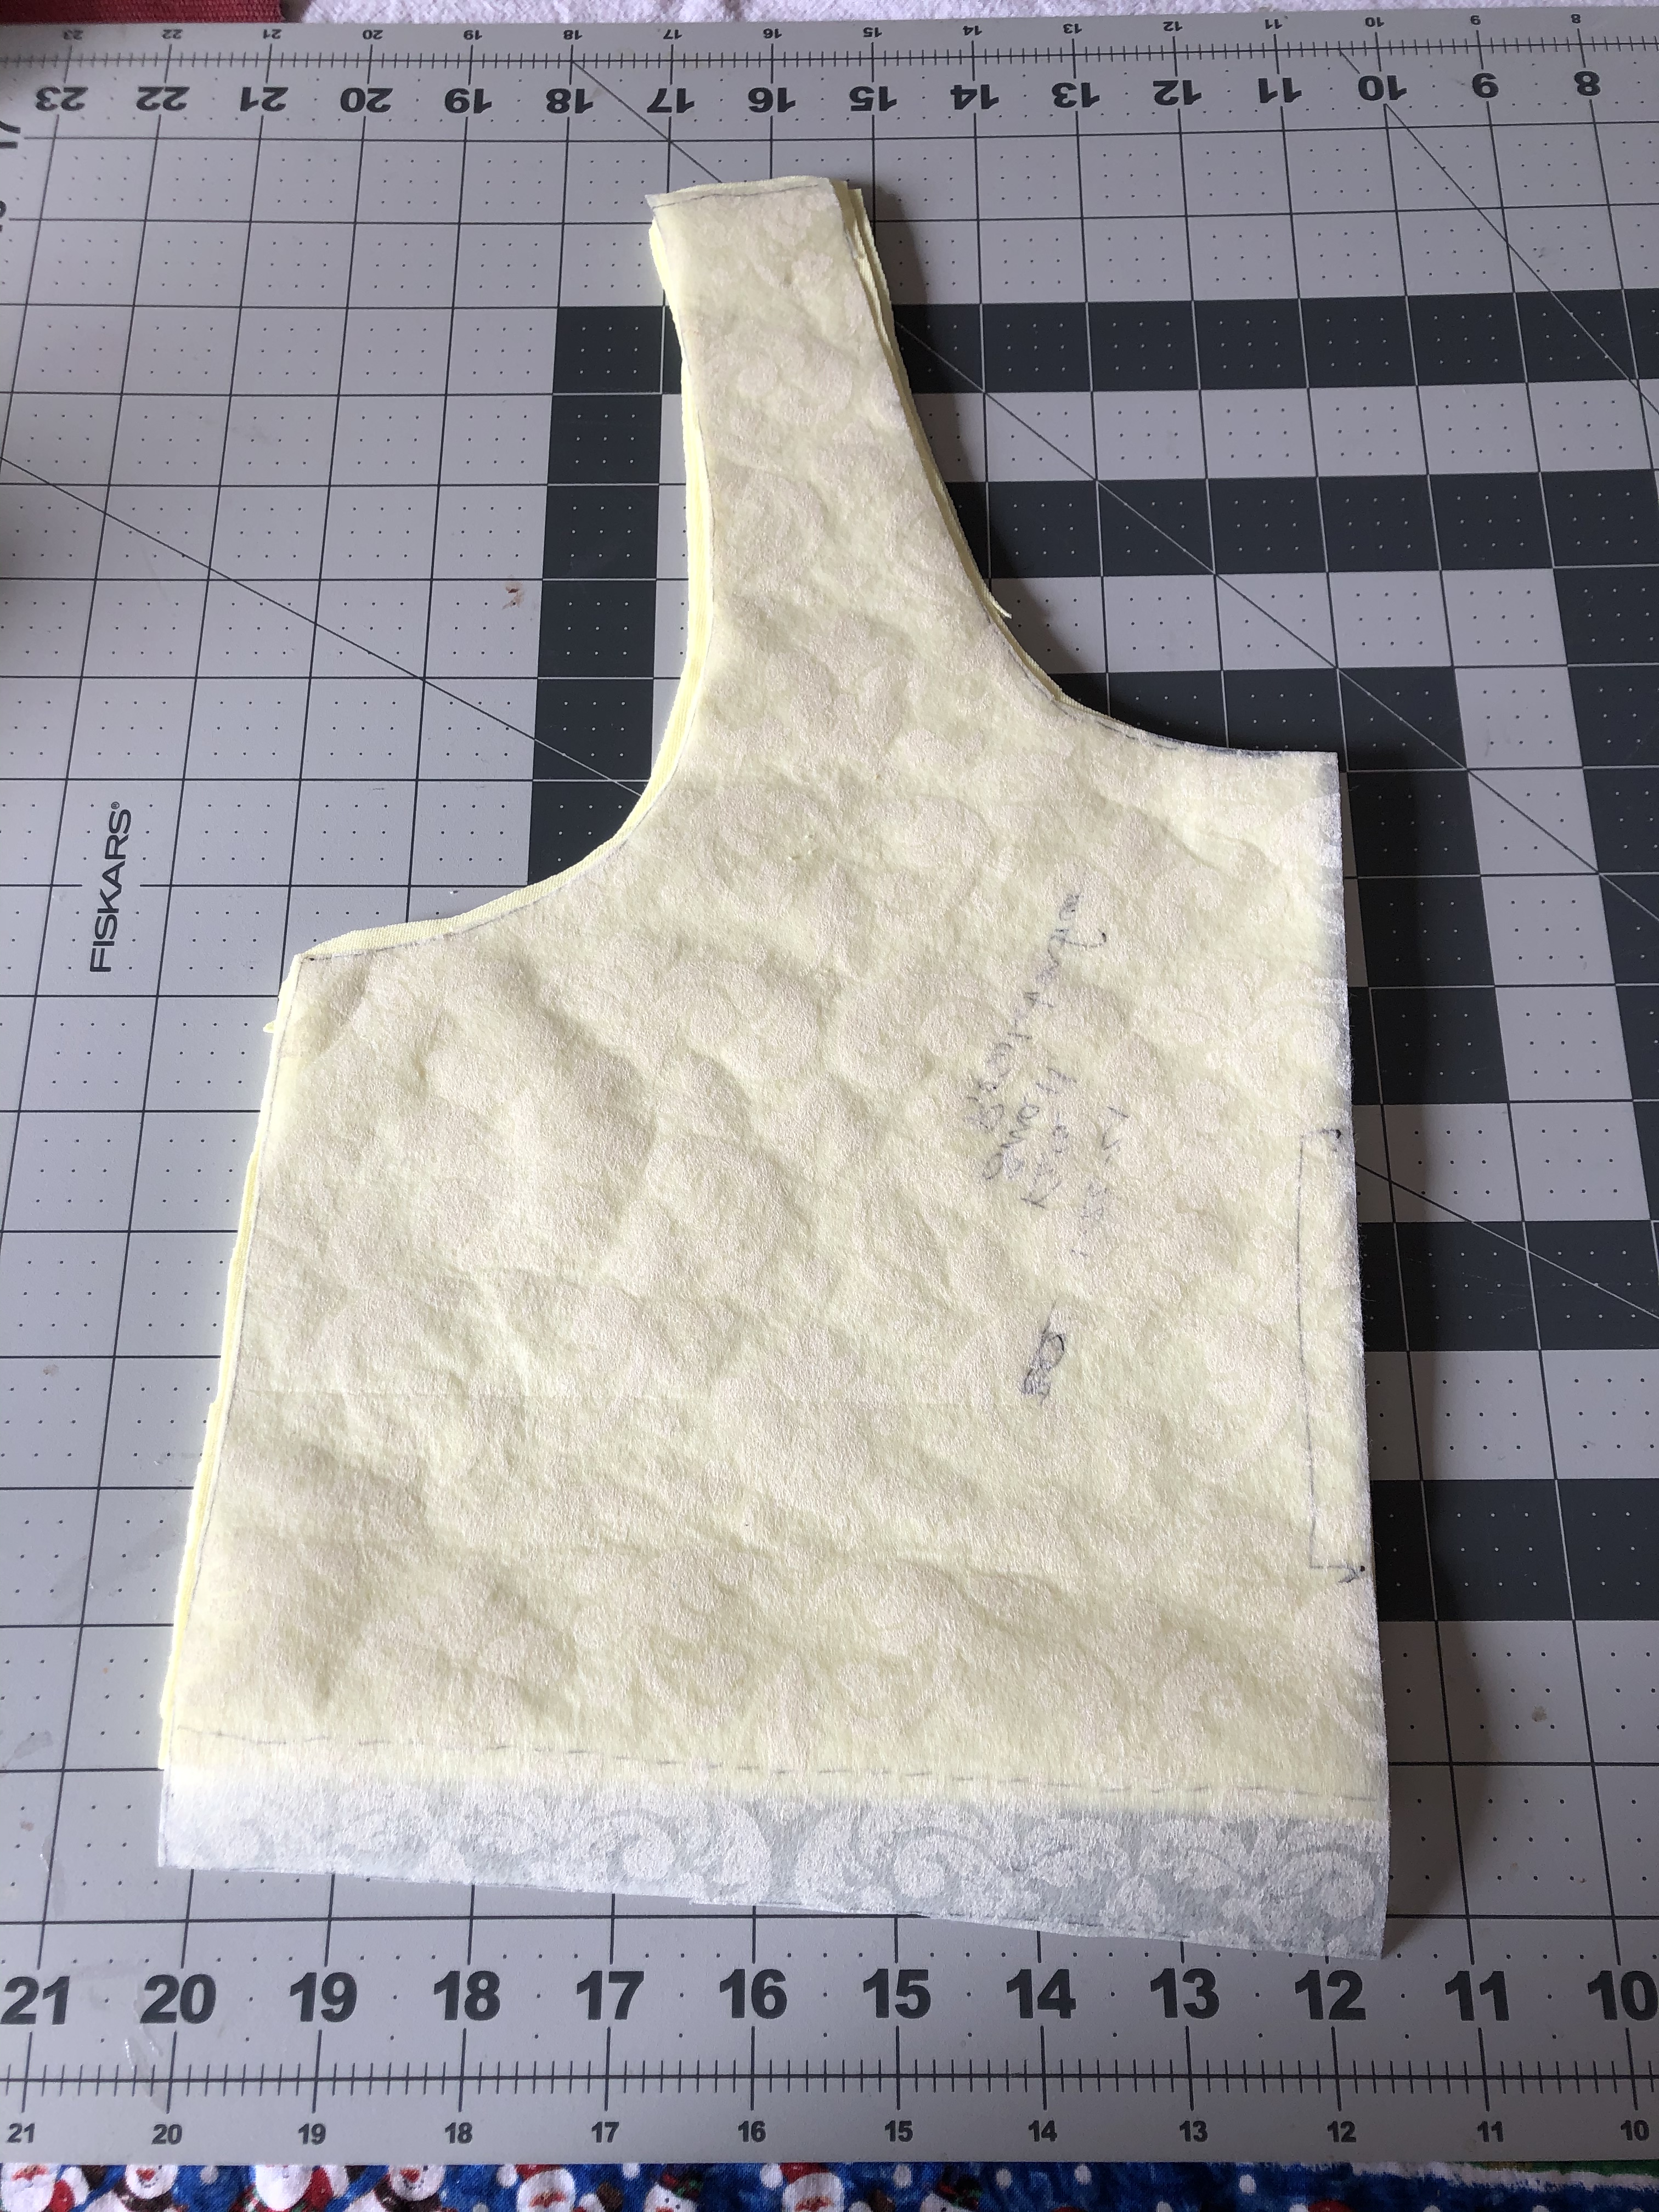 Tips for Sewing Fold-Over Elastic